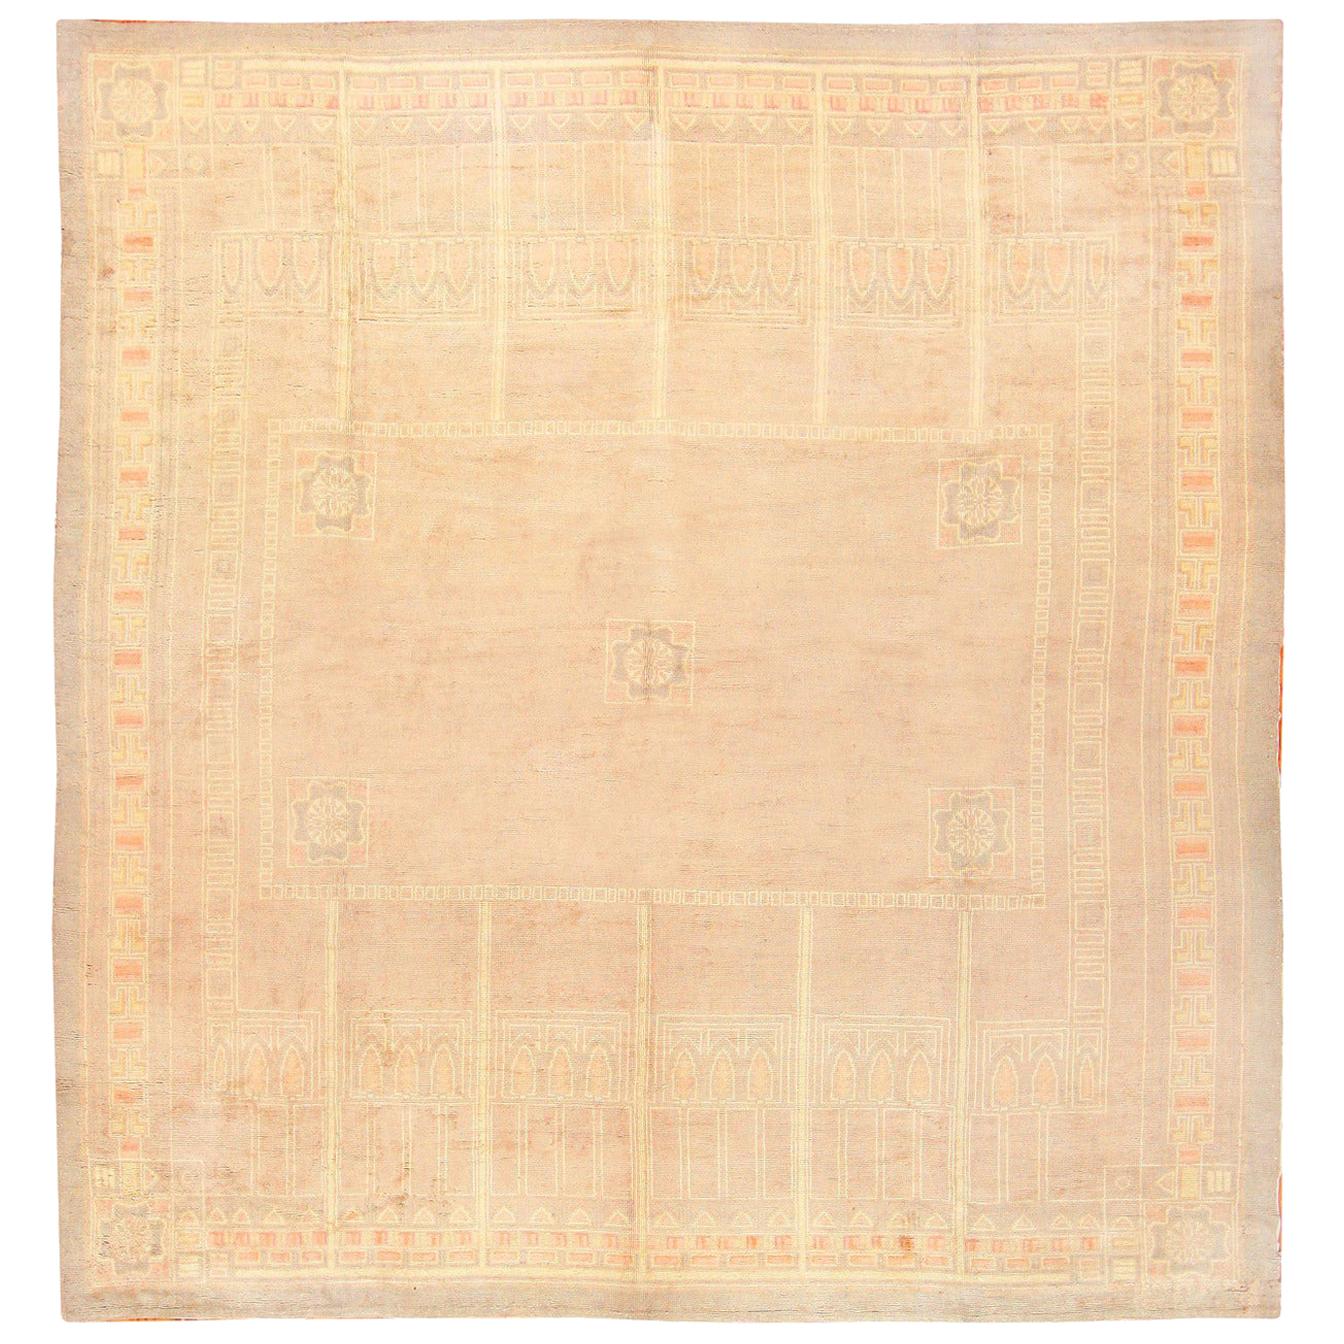 French Deco Rug. Size: 13 ft 7 in x 14 ft 2 in